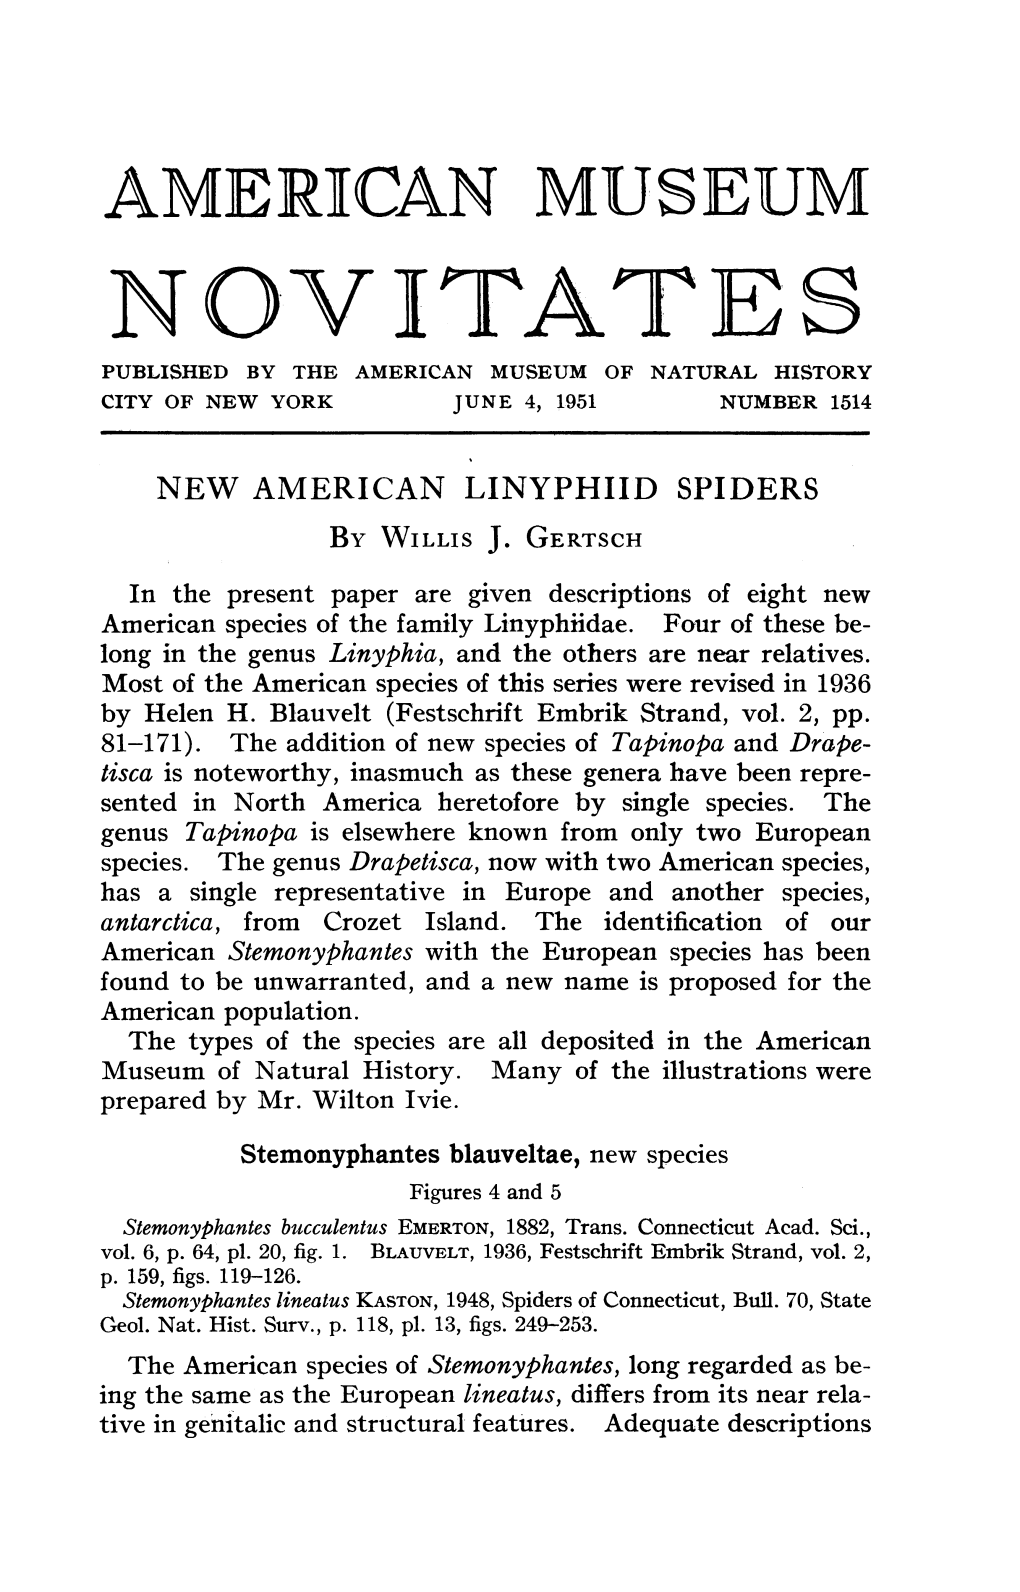 Nov)Itate S Published by the American Museum of Natural History City of New York Jun E 4, 1951 Number 1514